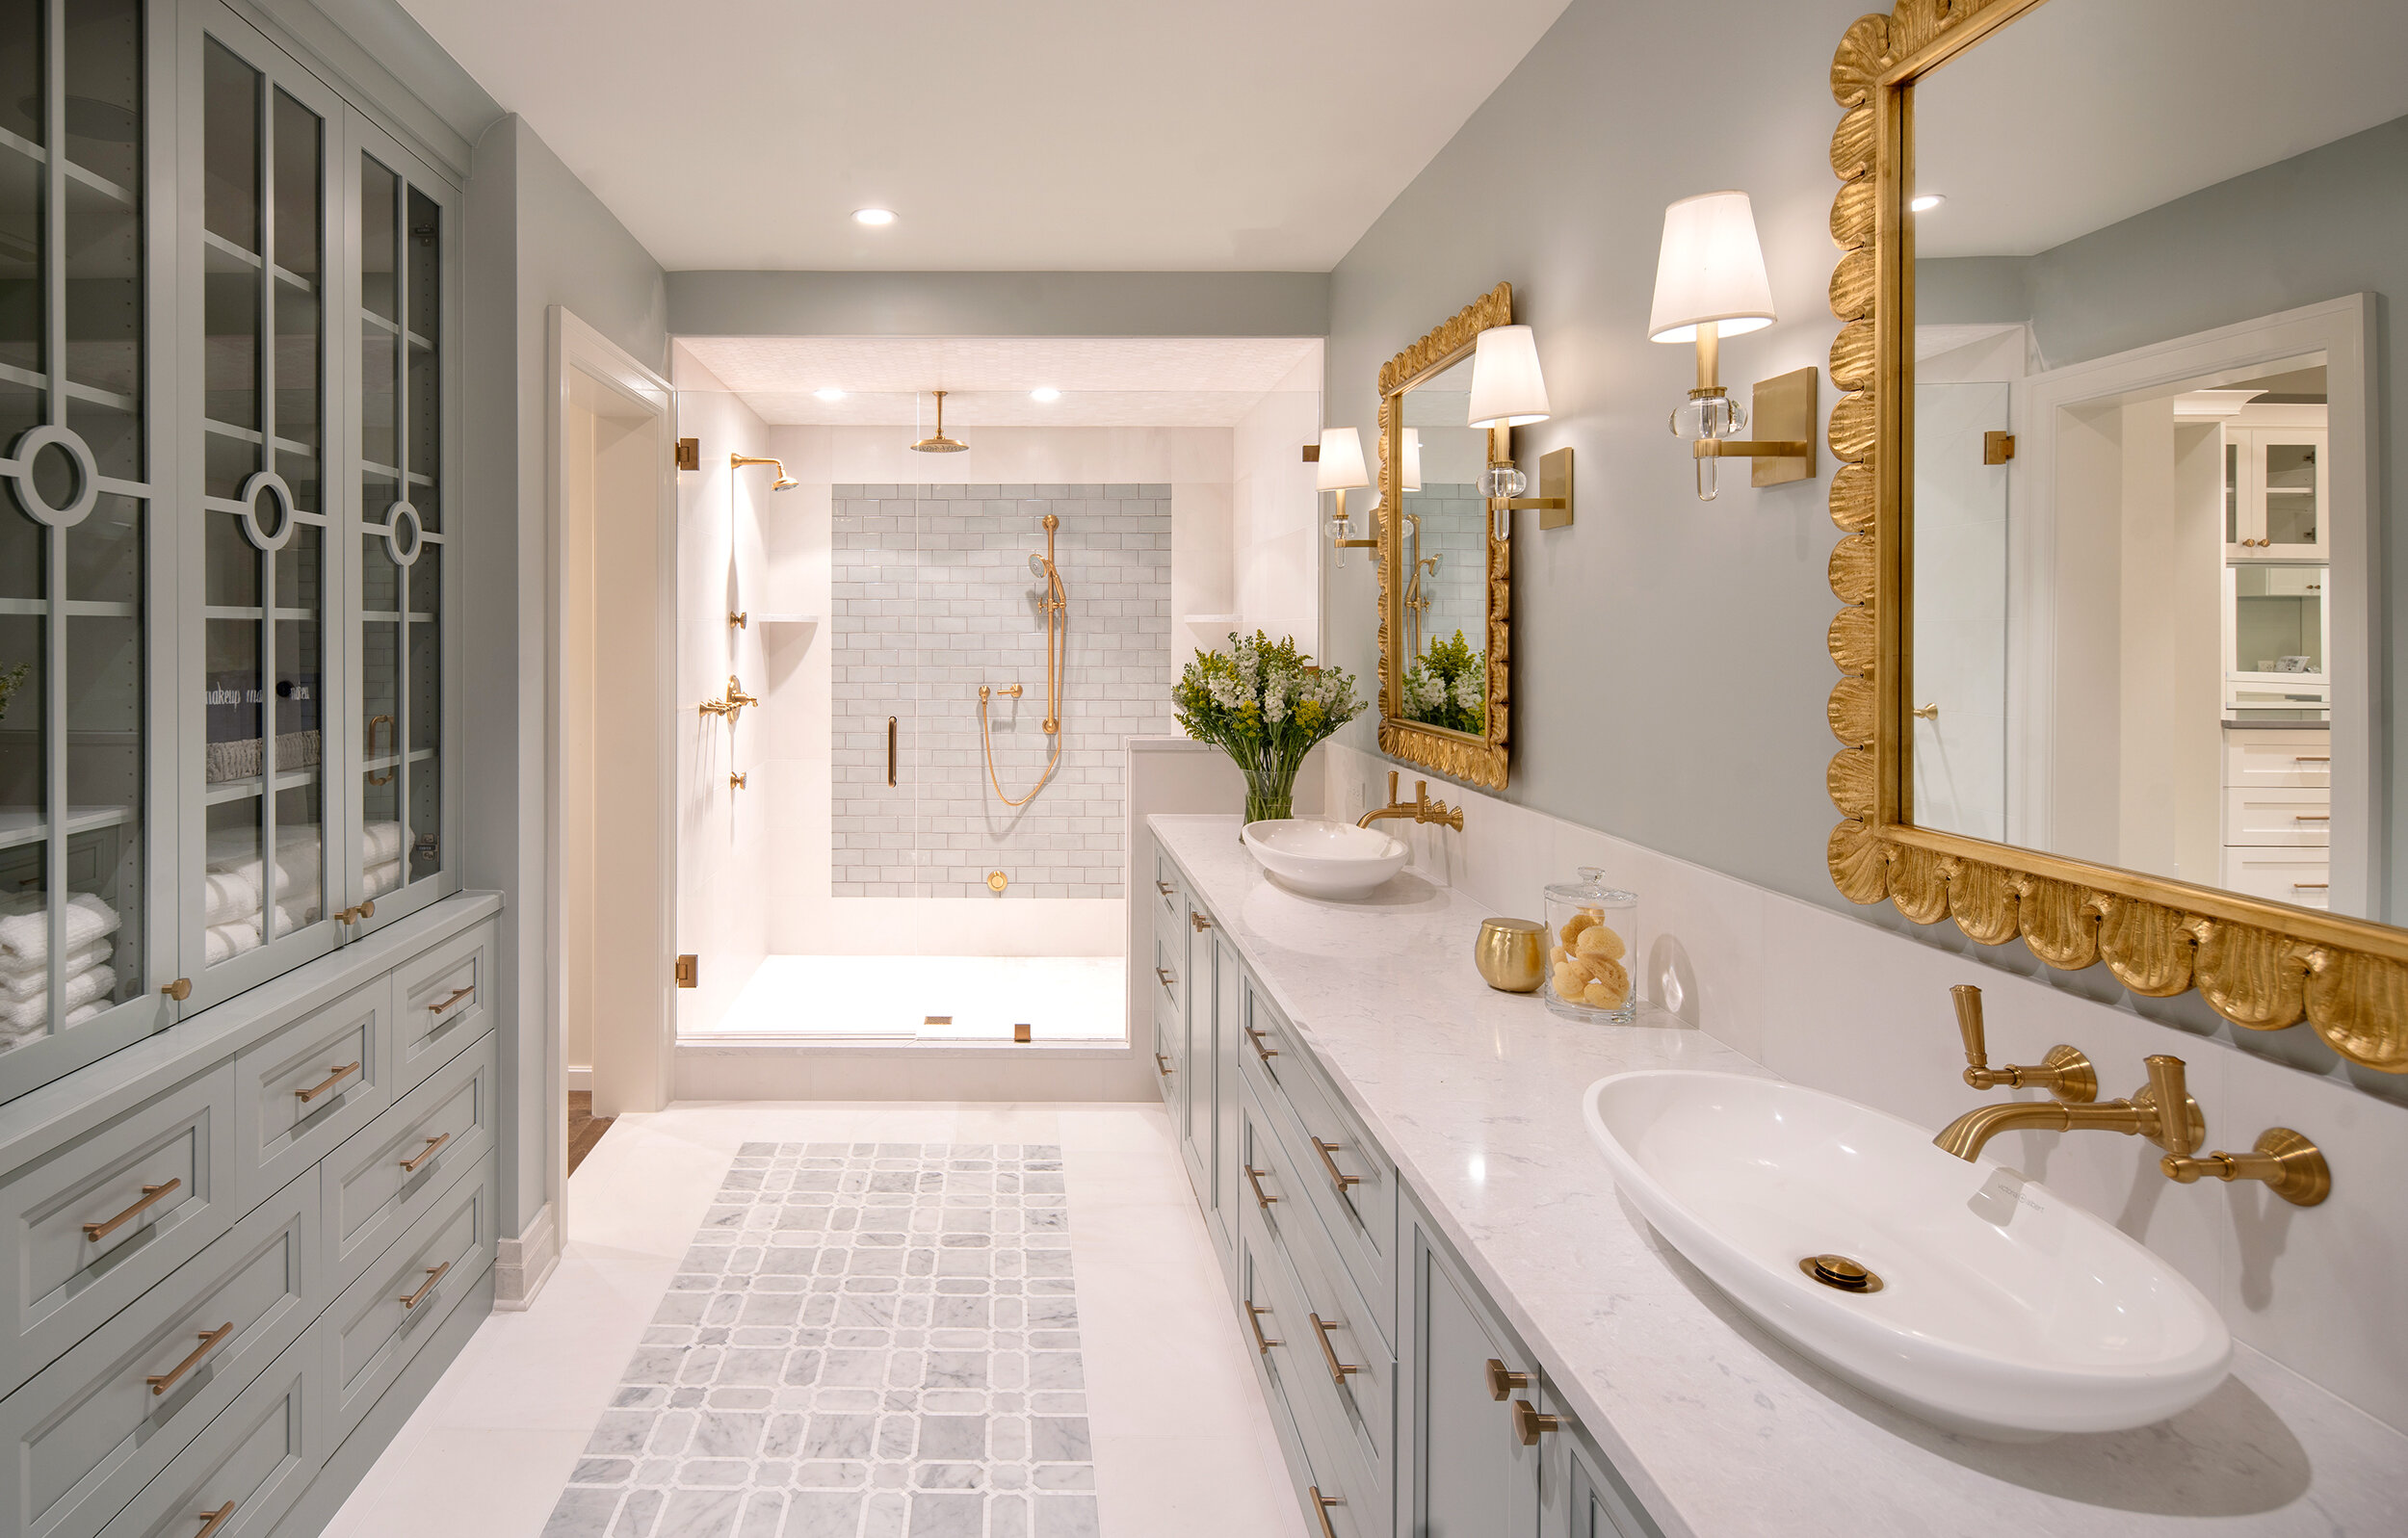 Grey and white bathroom with gold mirror and details